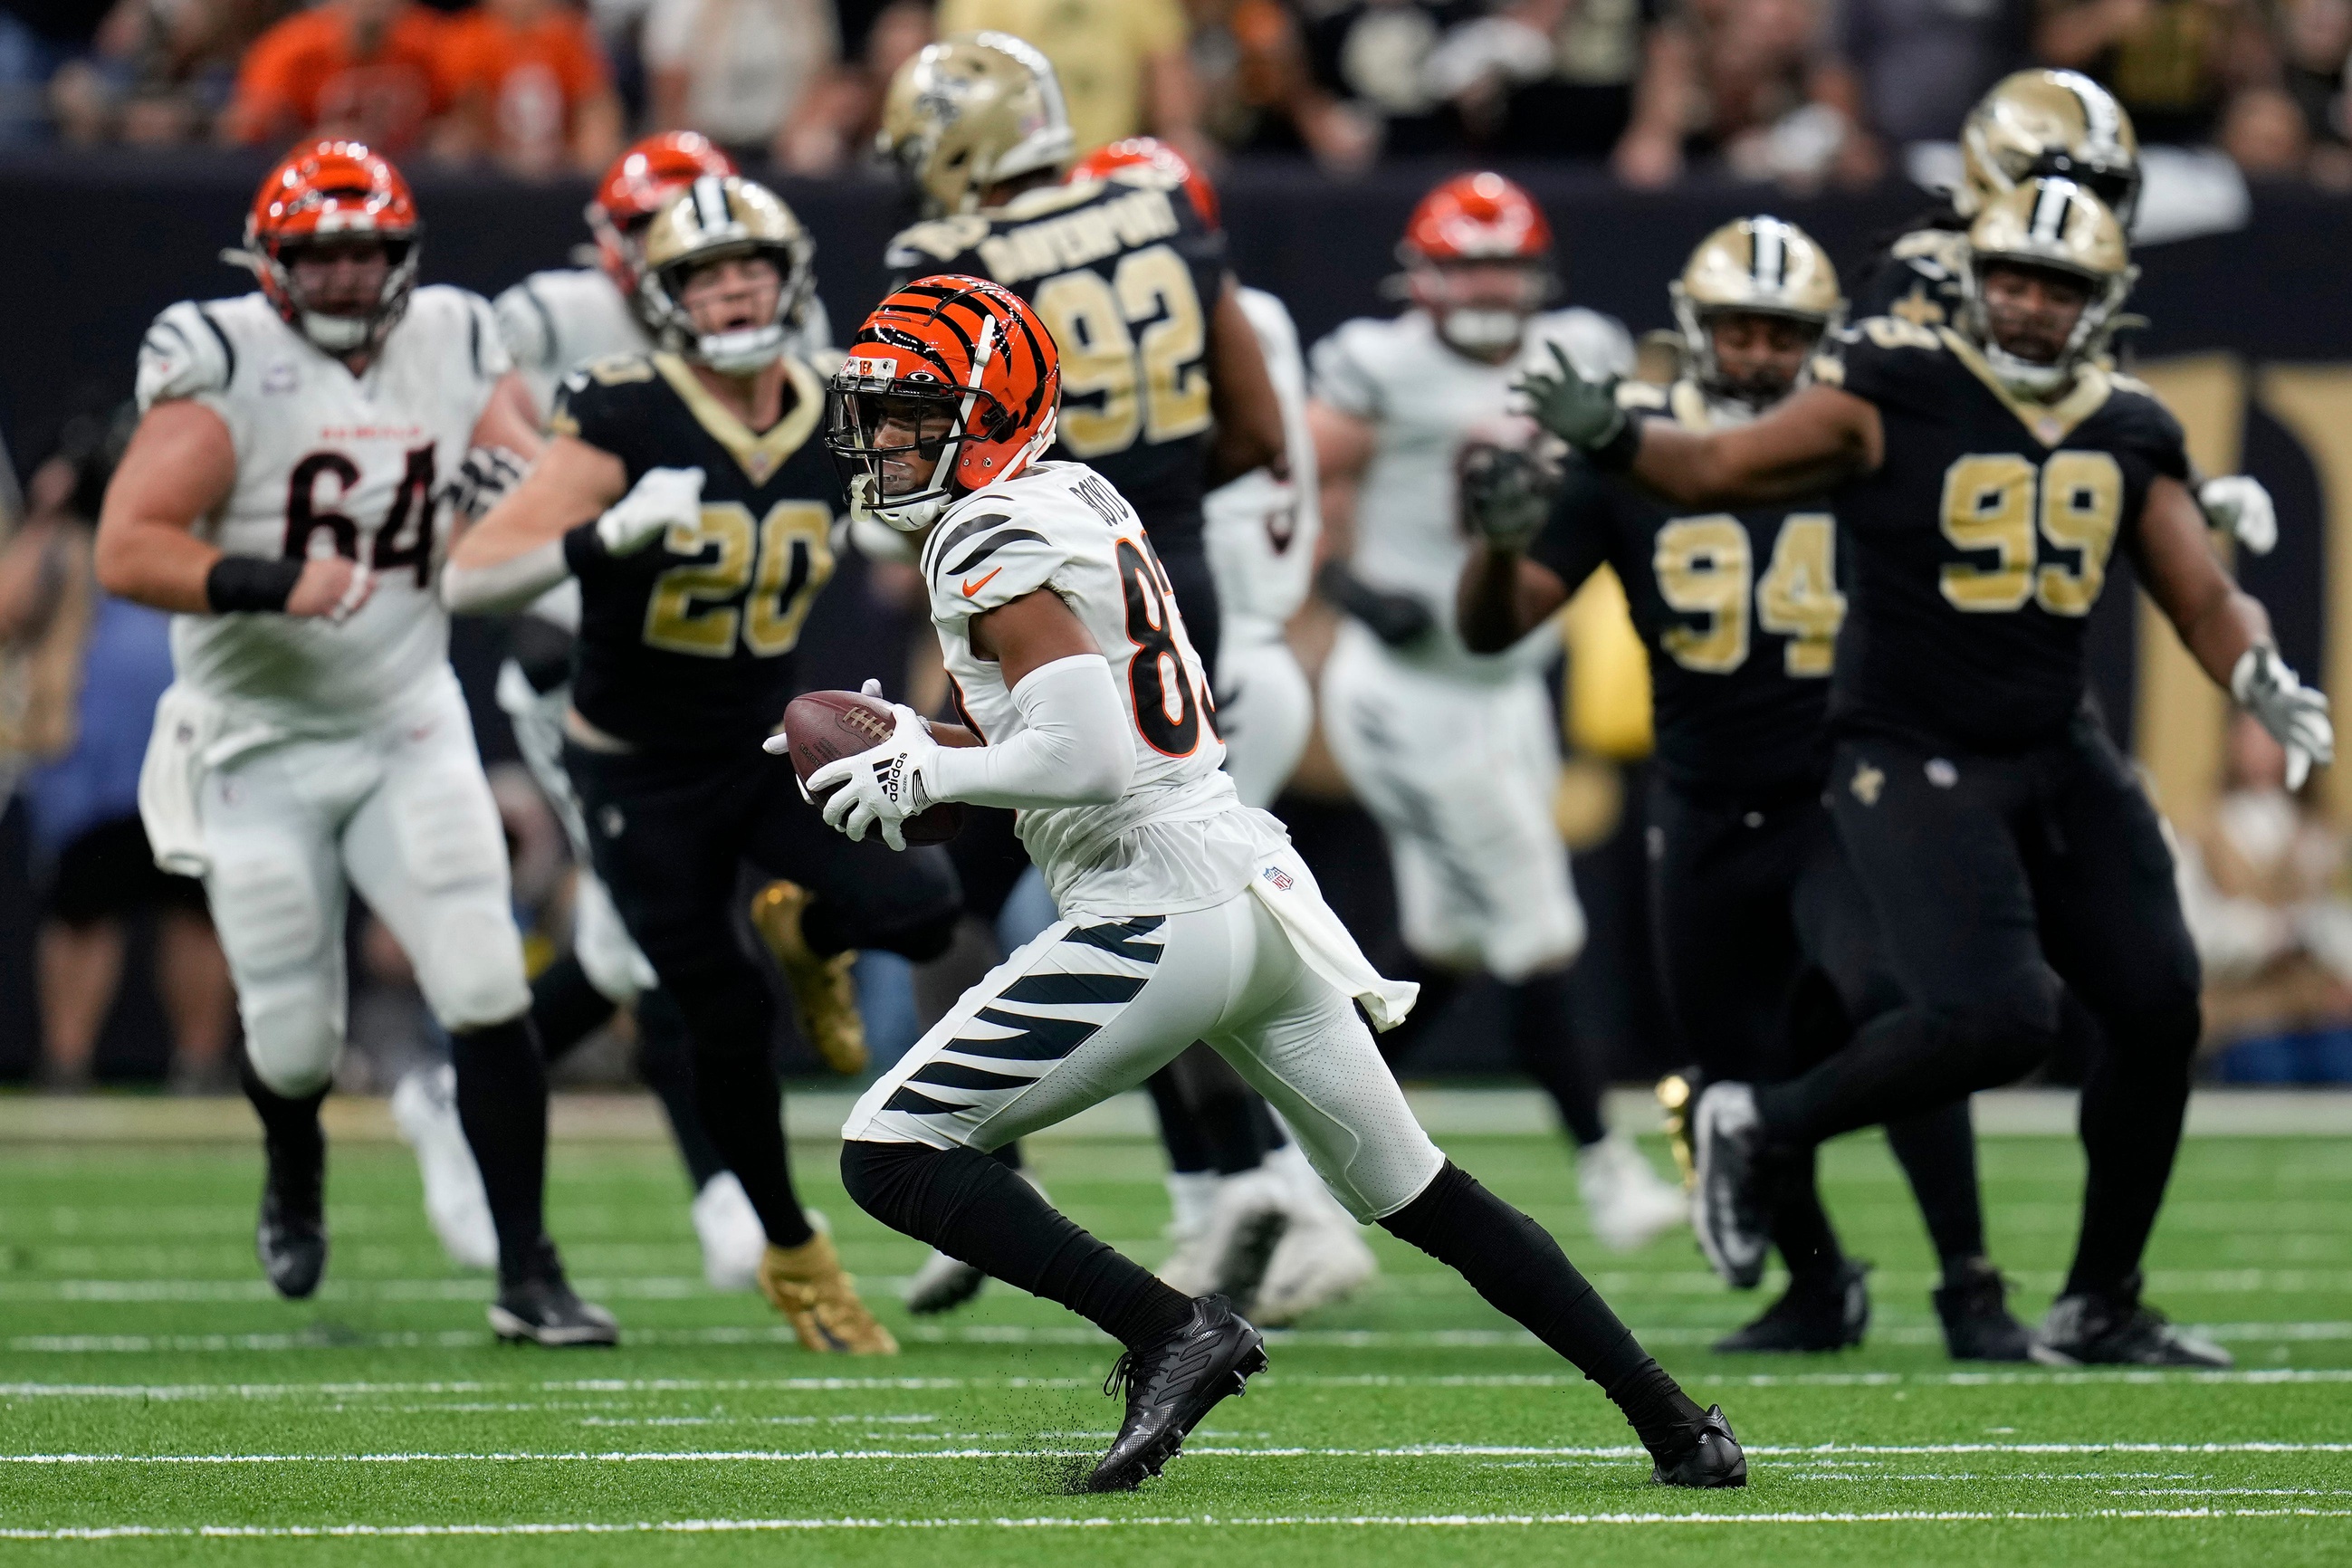 Cincinnati Bengals wide receiver Tyler Boyd (83) catches a pass against the New Orleans Saints. © Cara Owsley/The Enquirer / USA TODAY NETWORK